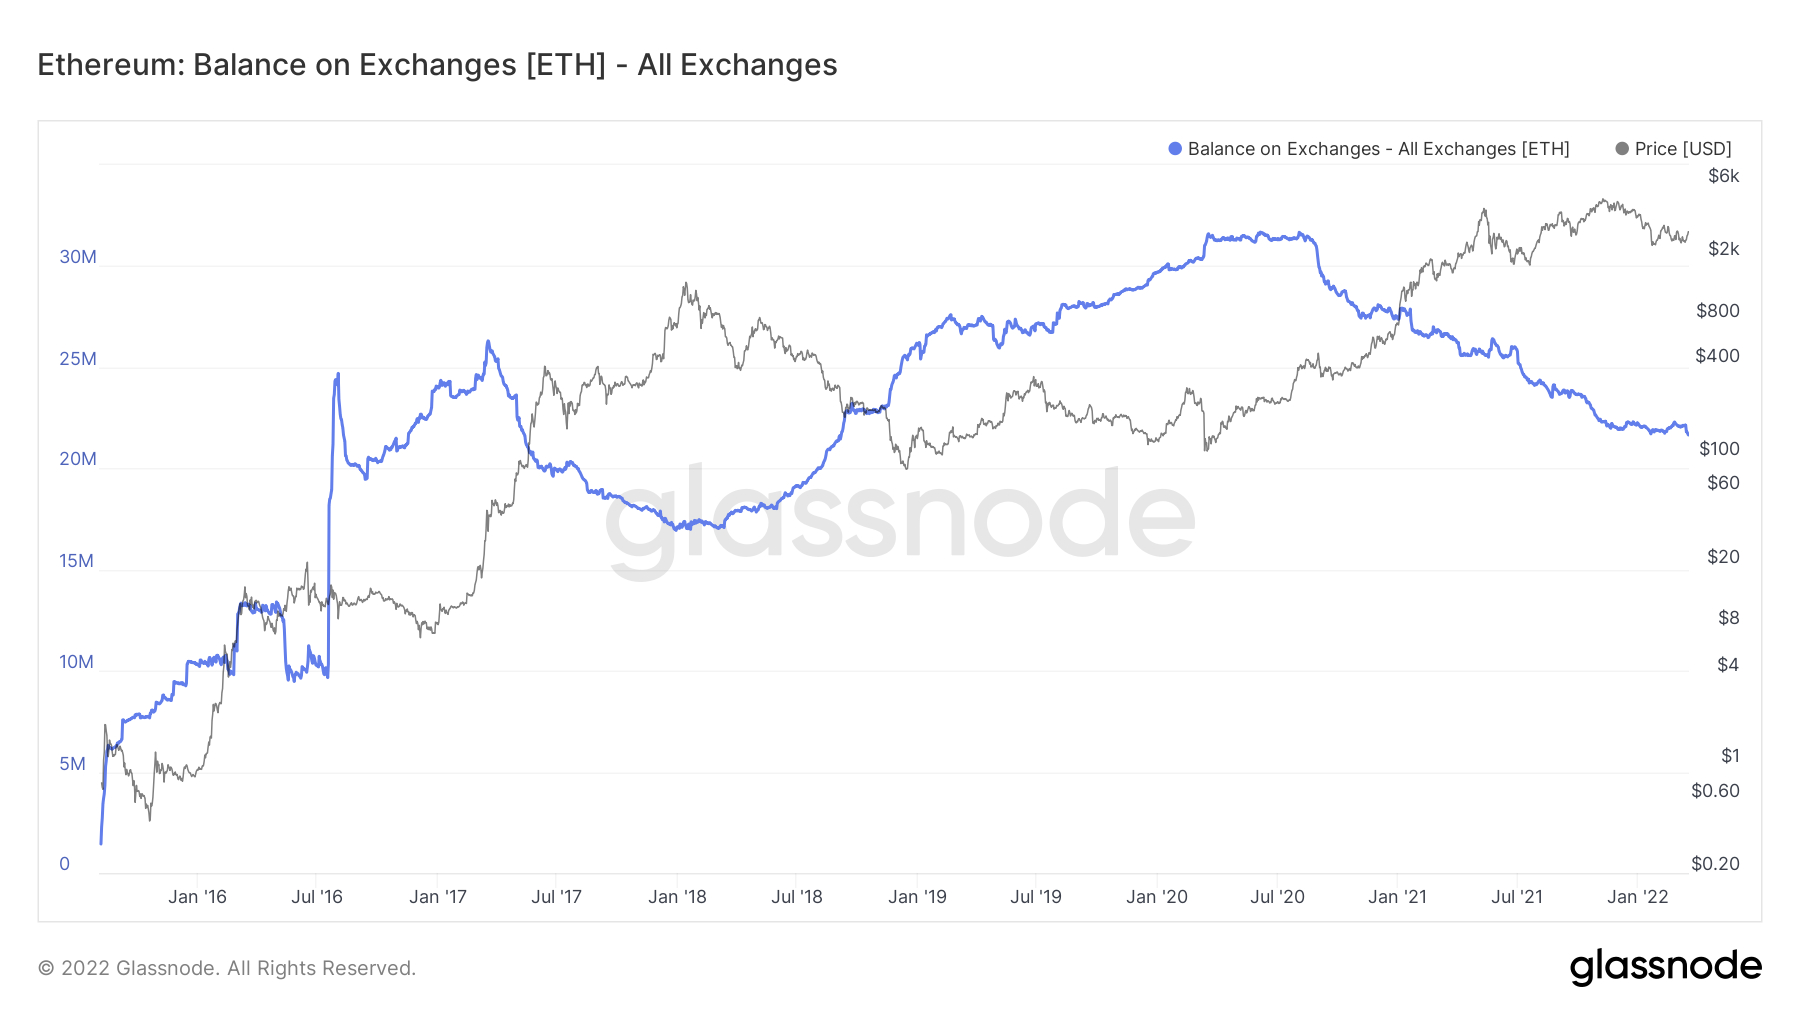 Balance of Ethereum on all exchanges as of March 21, 2022. Source: Glassnode